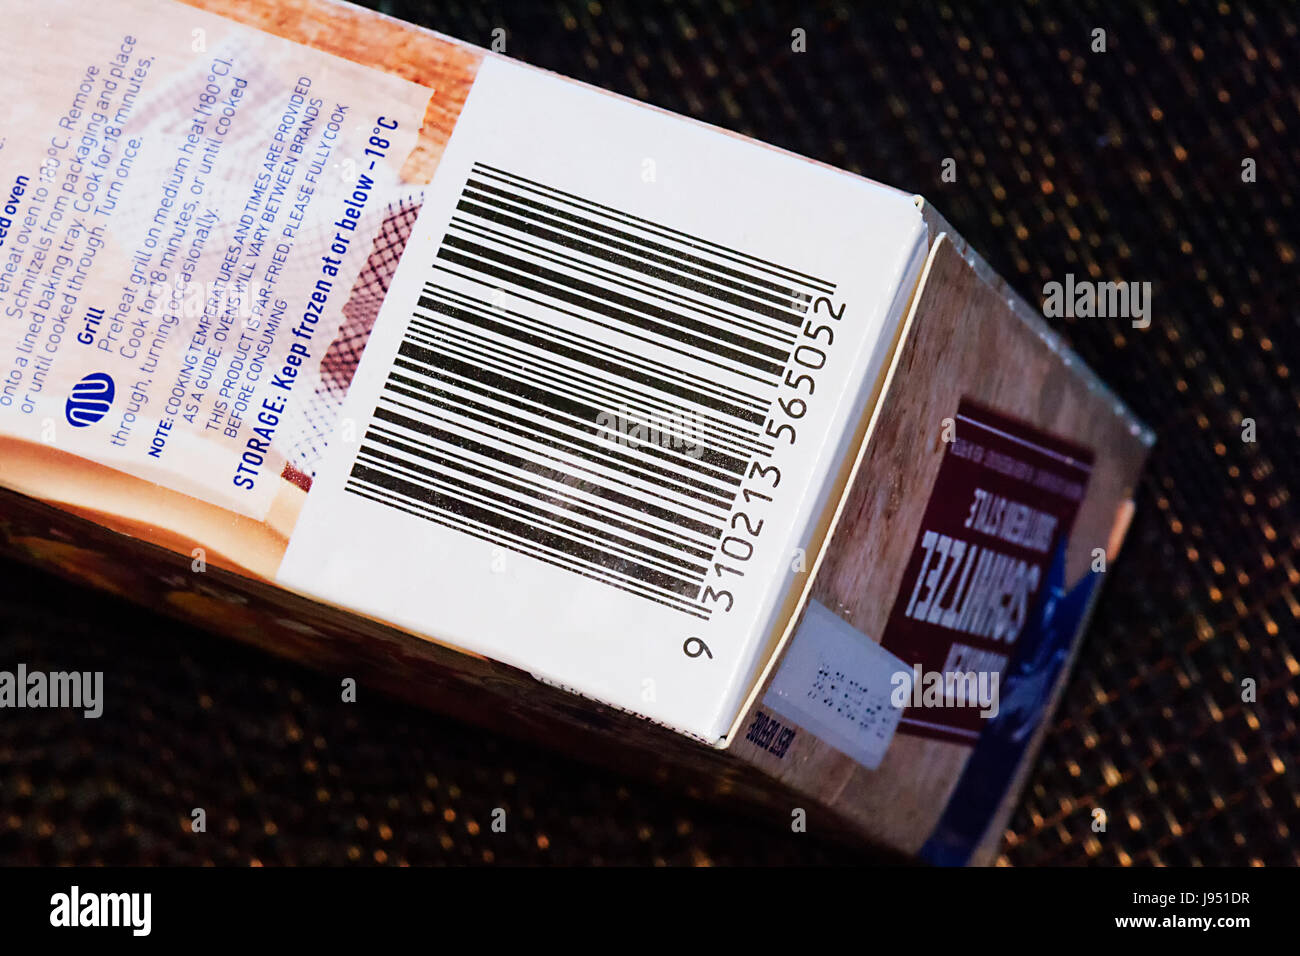 Close up of a Bar code on packaging, Australia Stock Photo